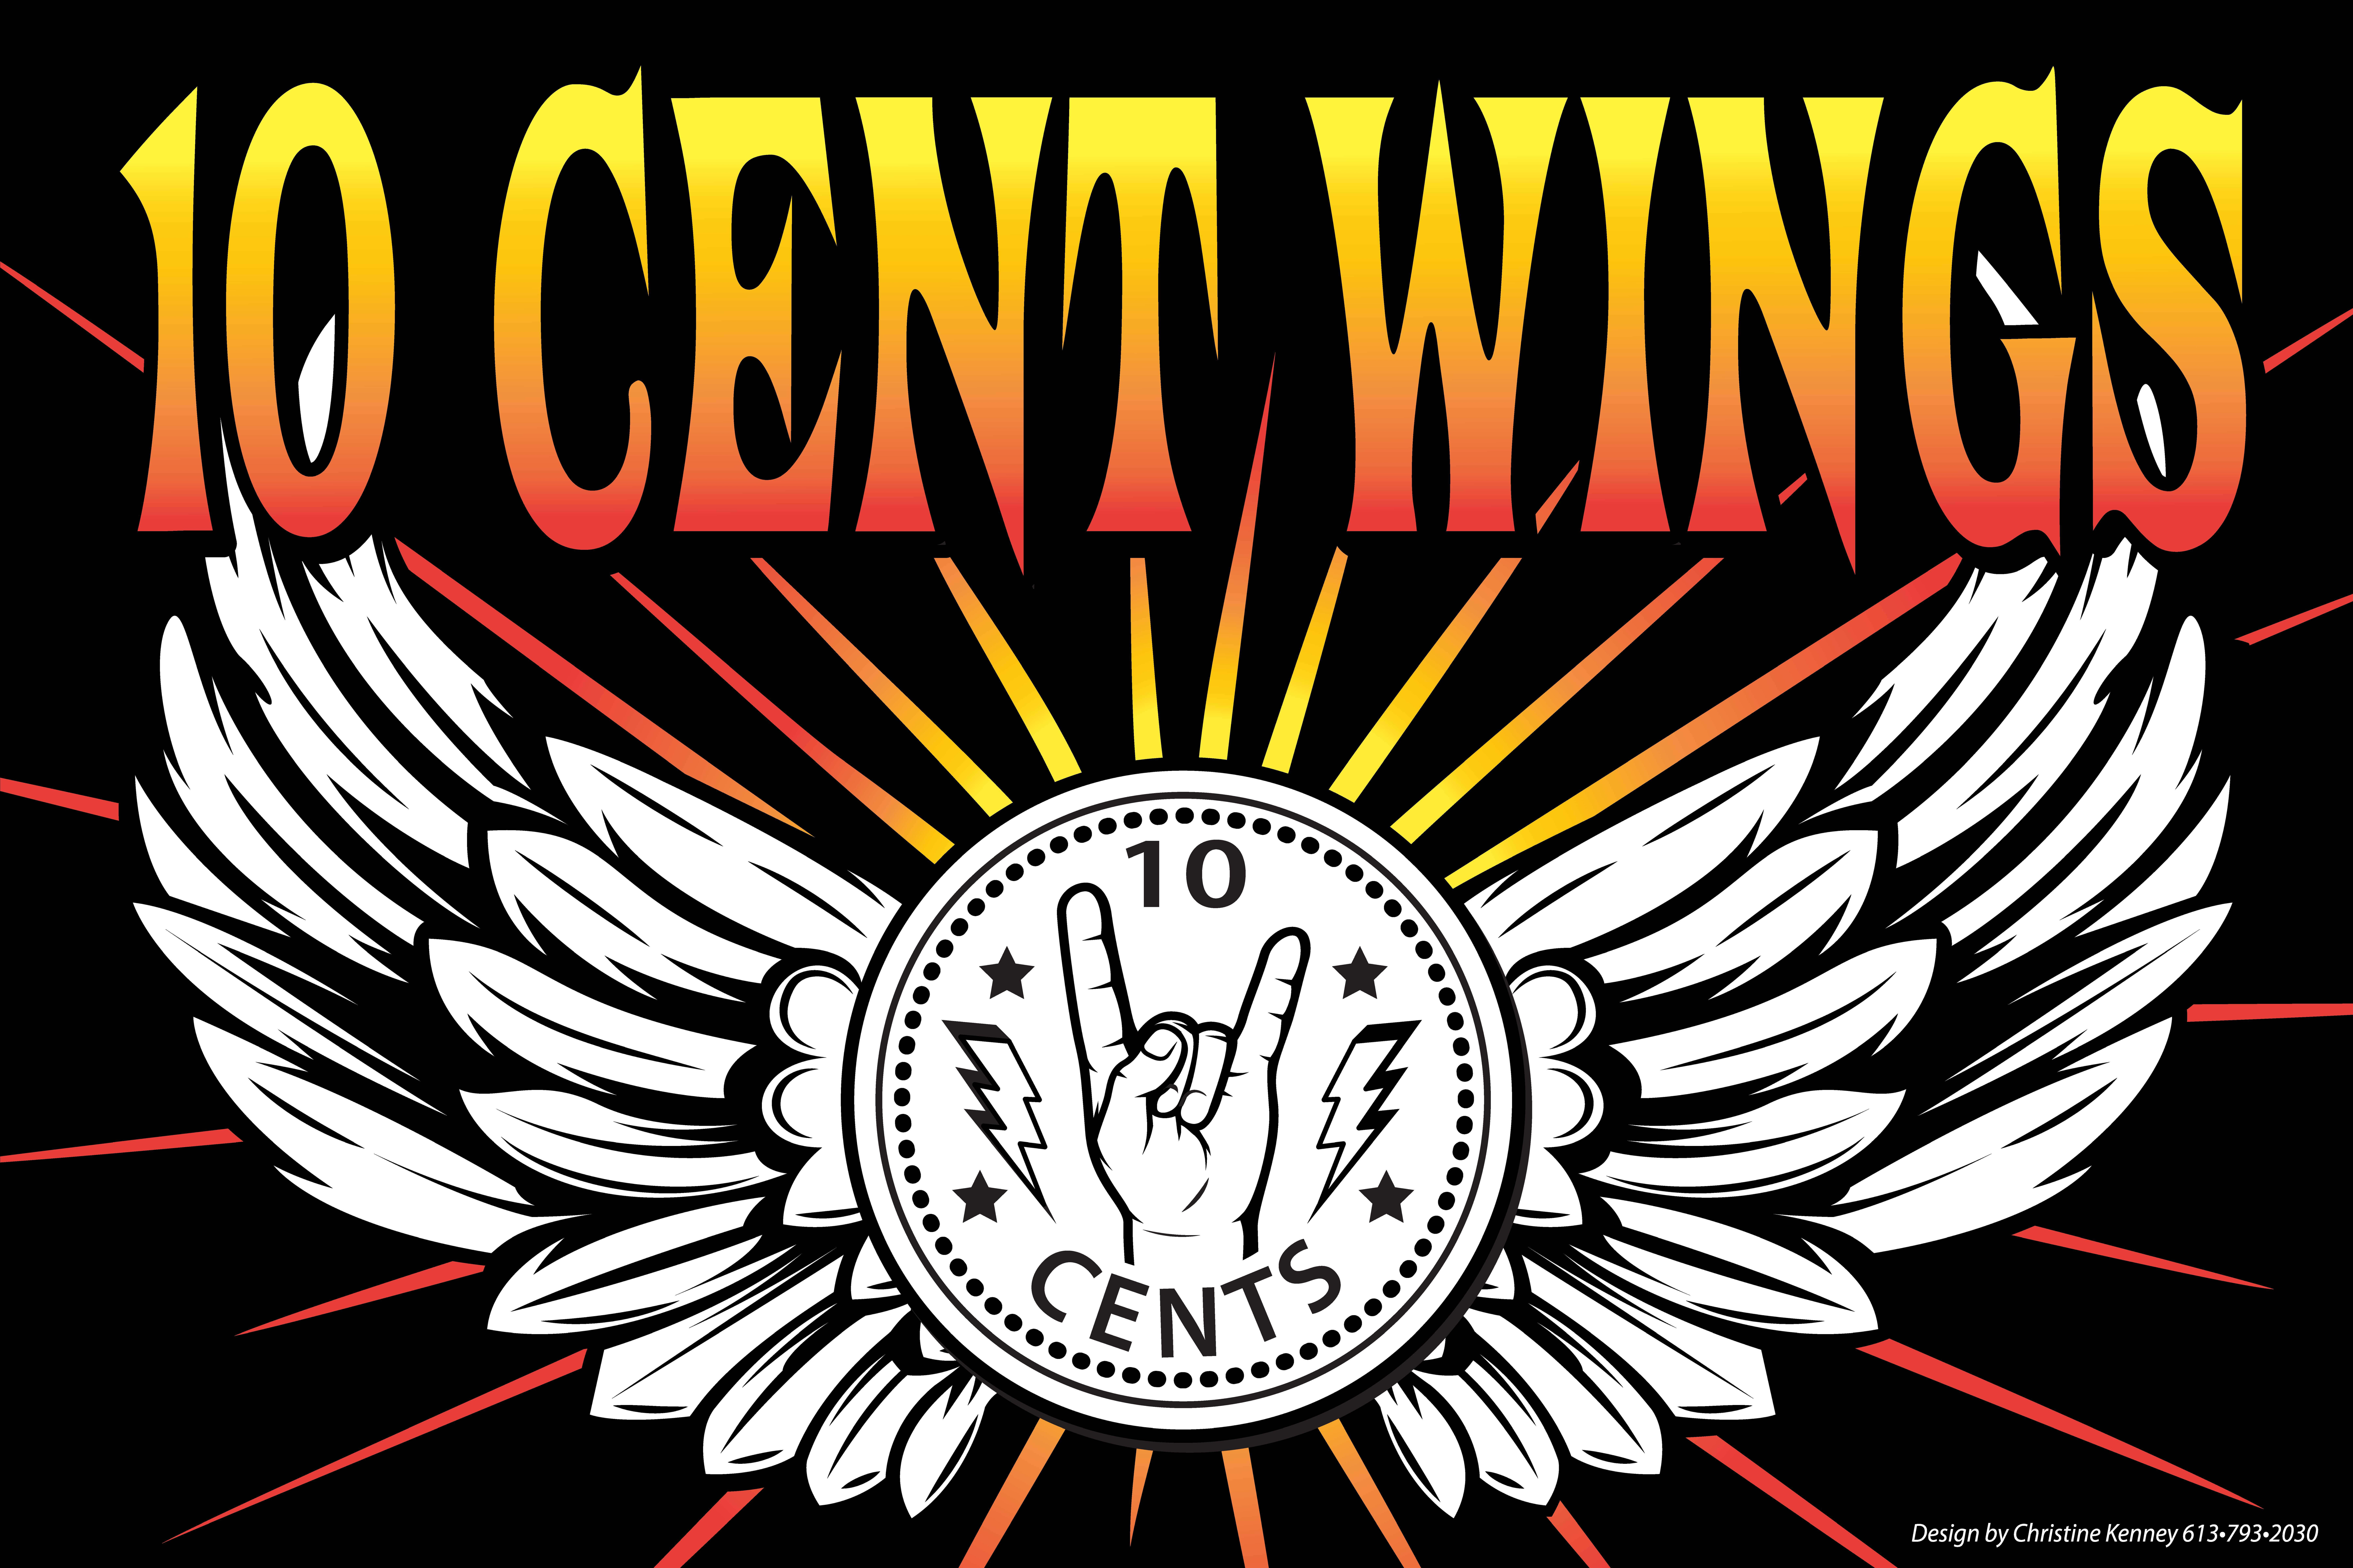 10centwings_Logo banner_final_4x6_to_print